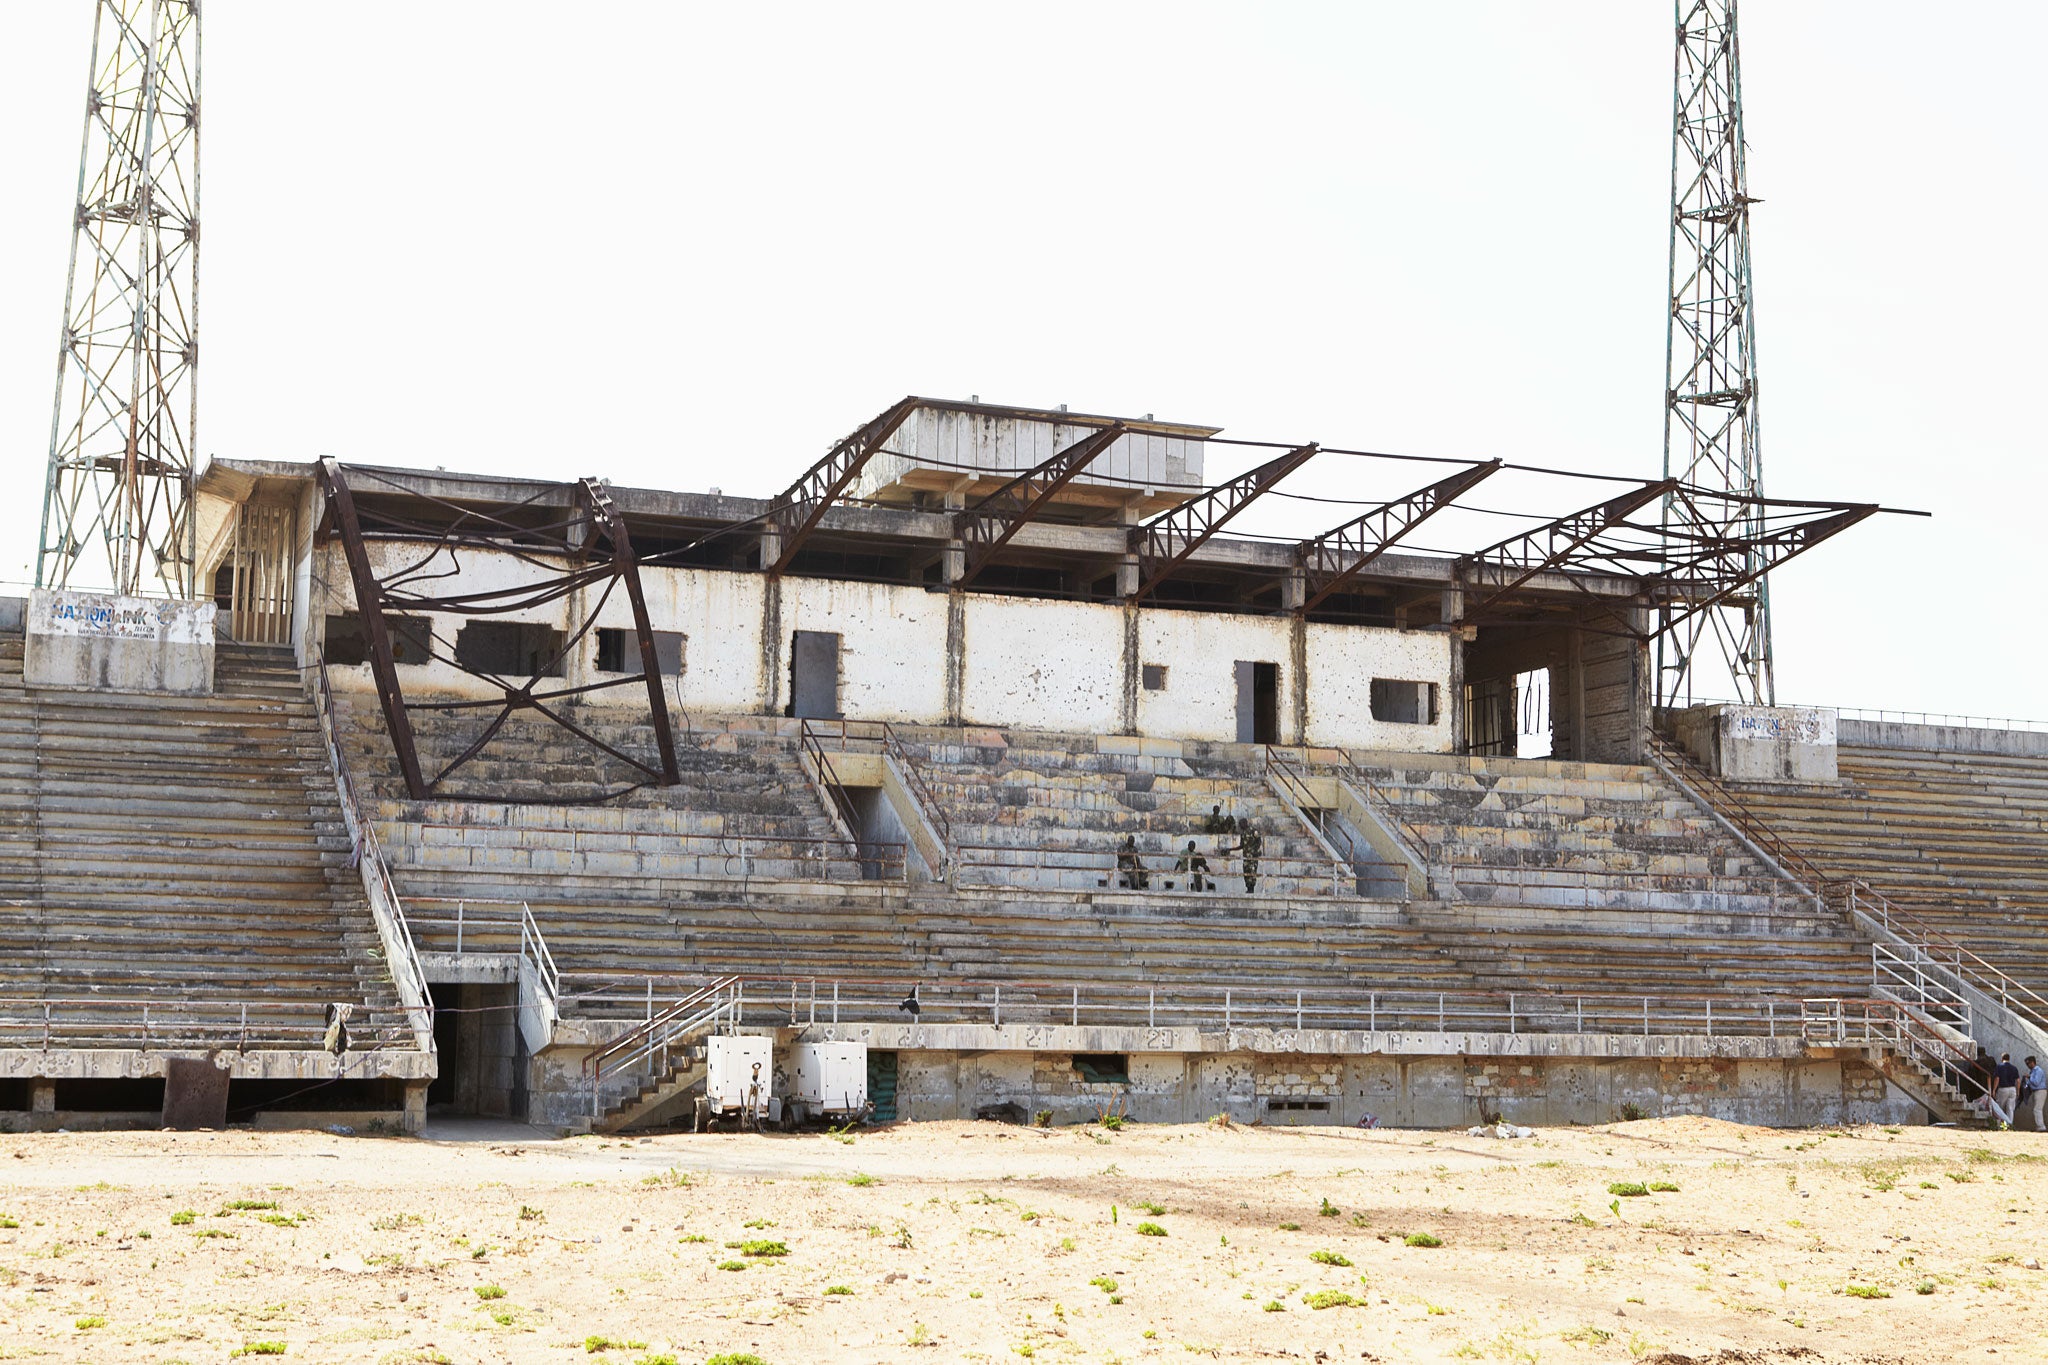 Mogadishu stadium was reduced to a shell when it became a centre for the fighting in the Somali capital. Al- Shabaab used it as a base until their men were forced out by Africa Union troops, now seen relaxing on its main stand